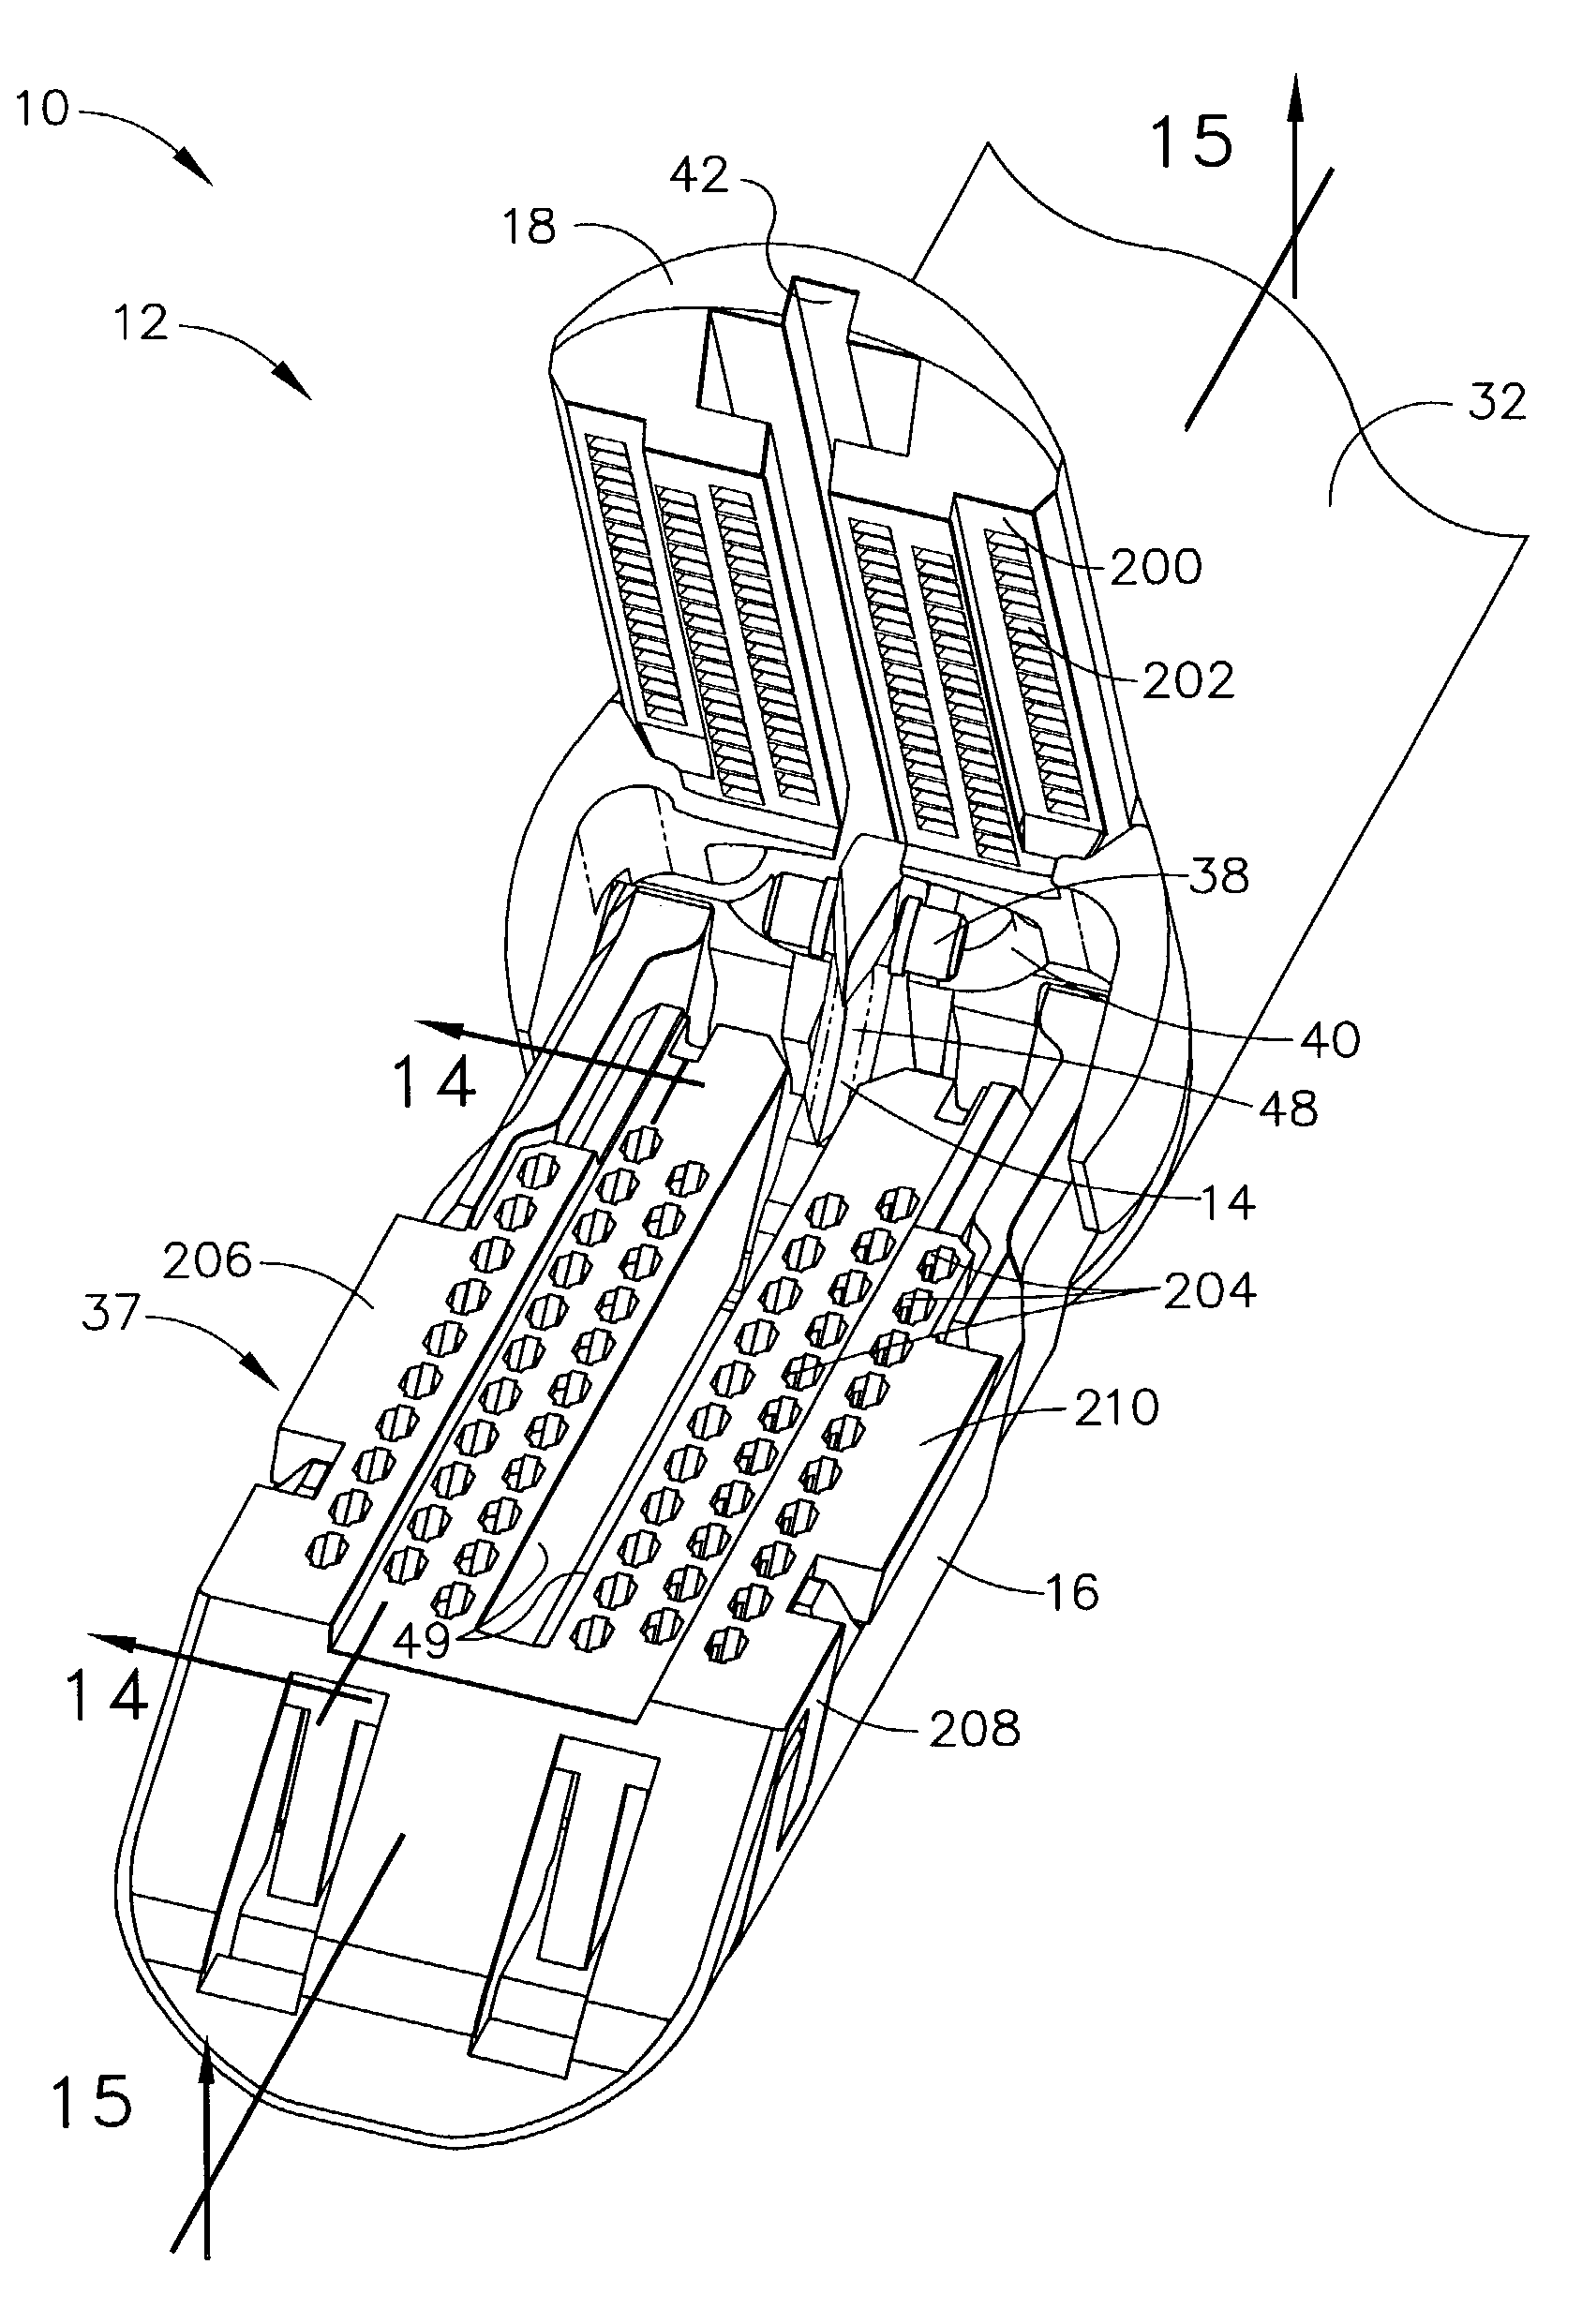 Surgical stapling instrument having separate distinct closing and firing systems